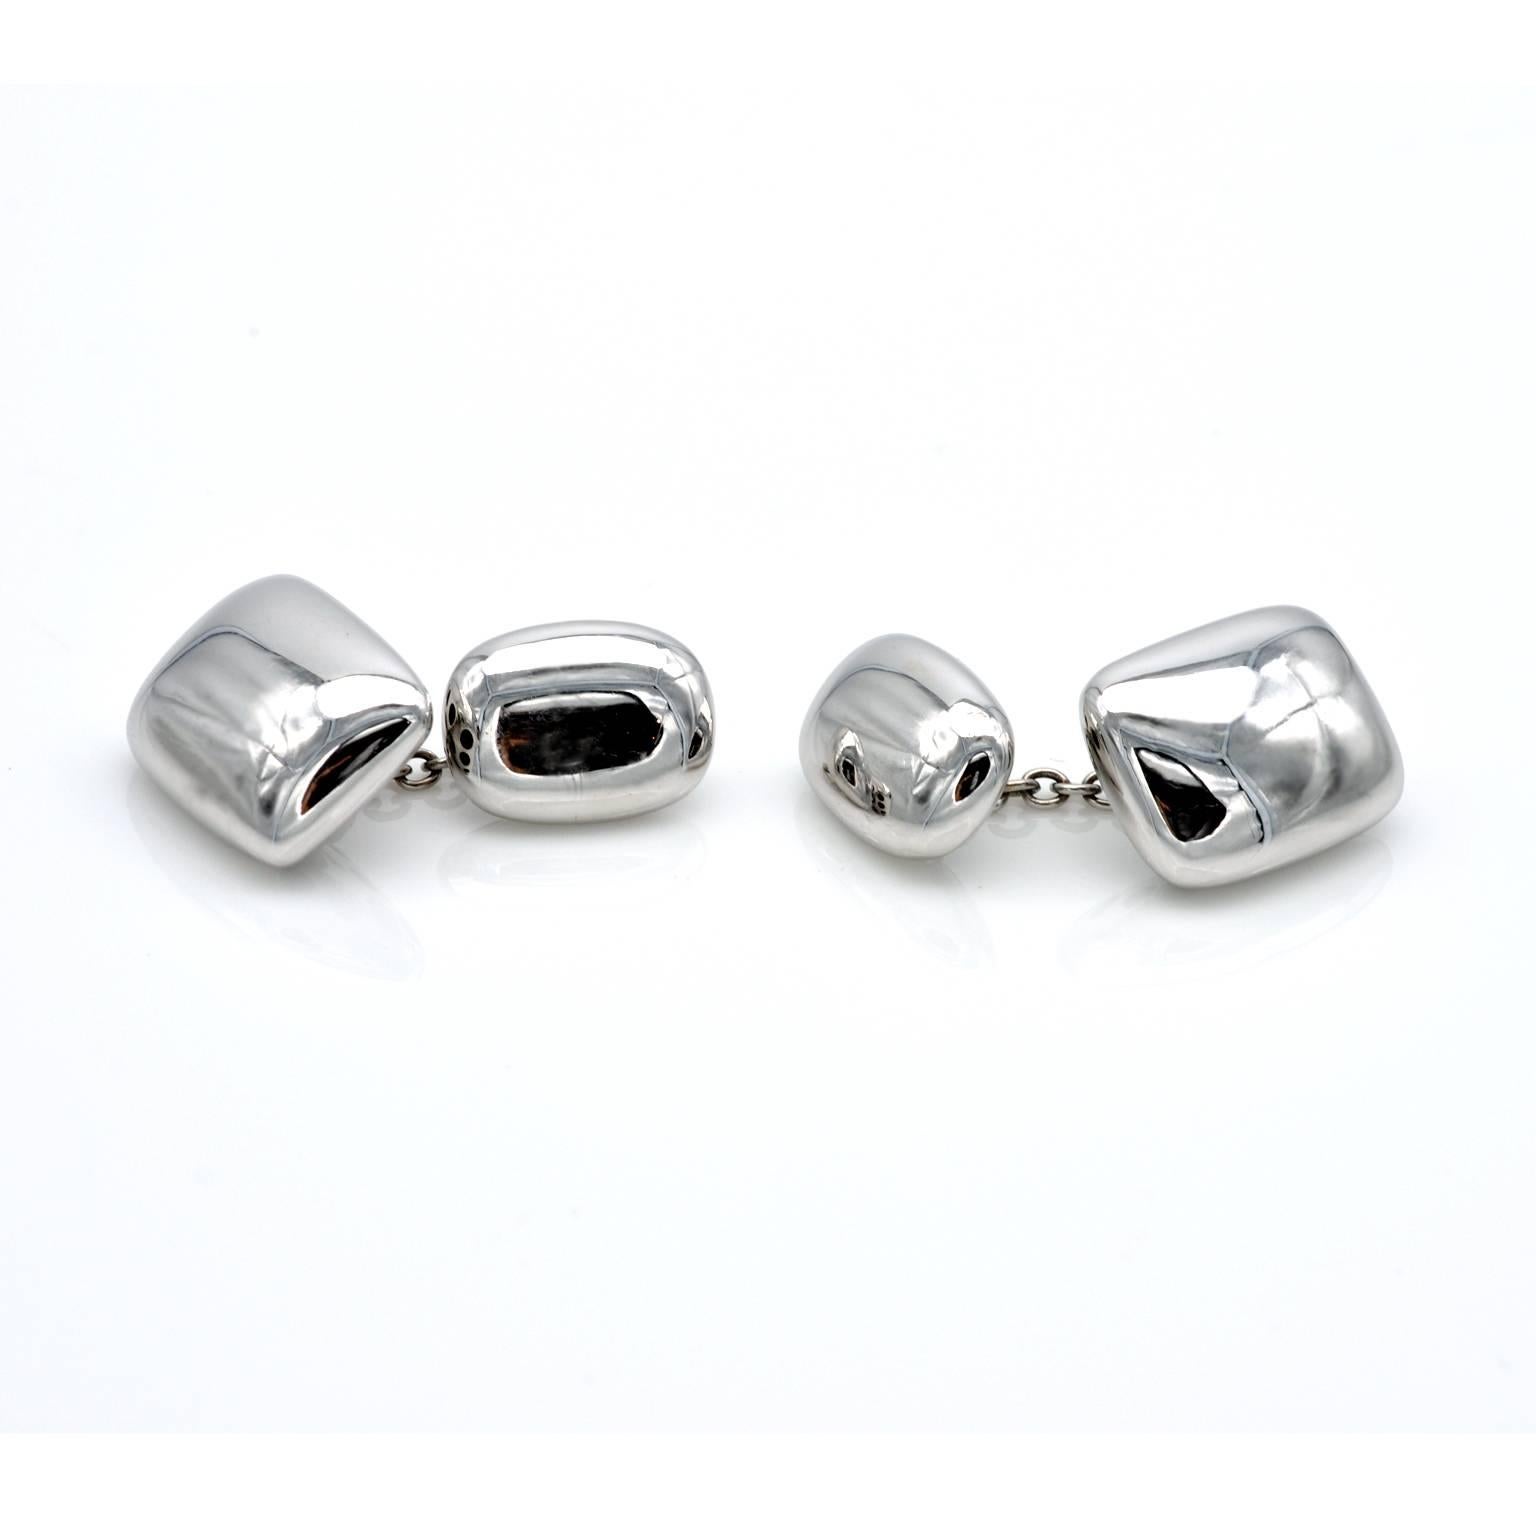 Modernist rectangular cushion saped cufflinks in 18kt white gold. they have a pleasant heft as well as eye catching look.
